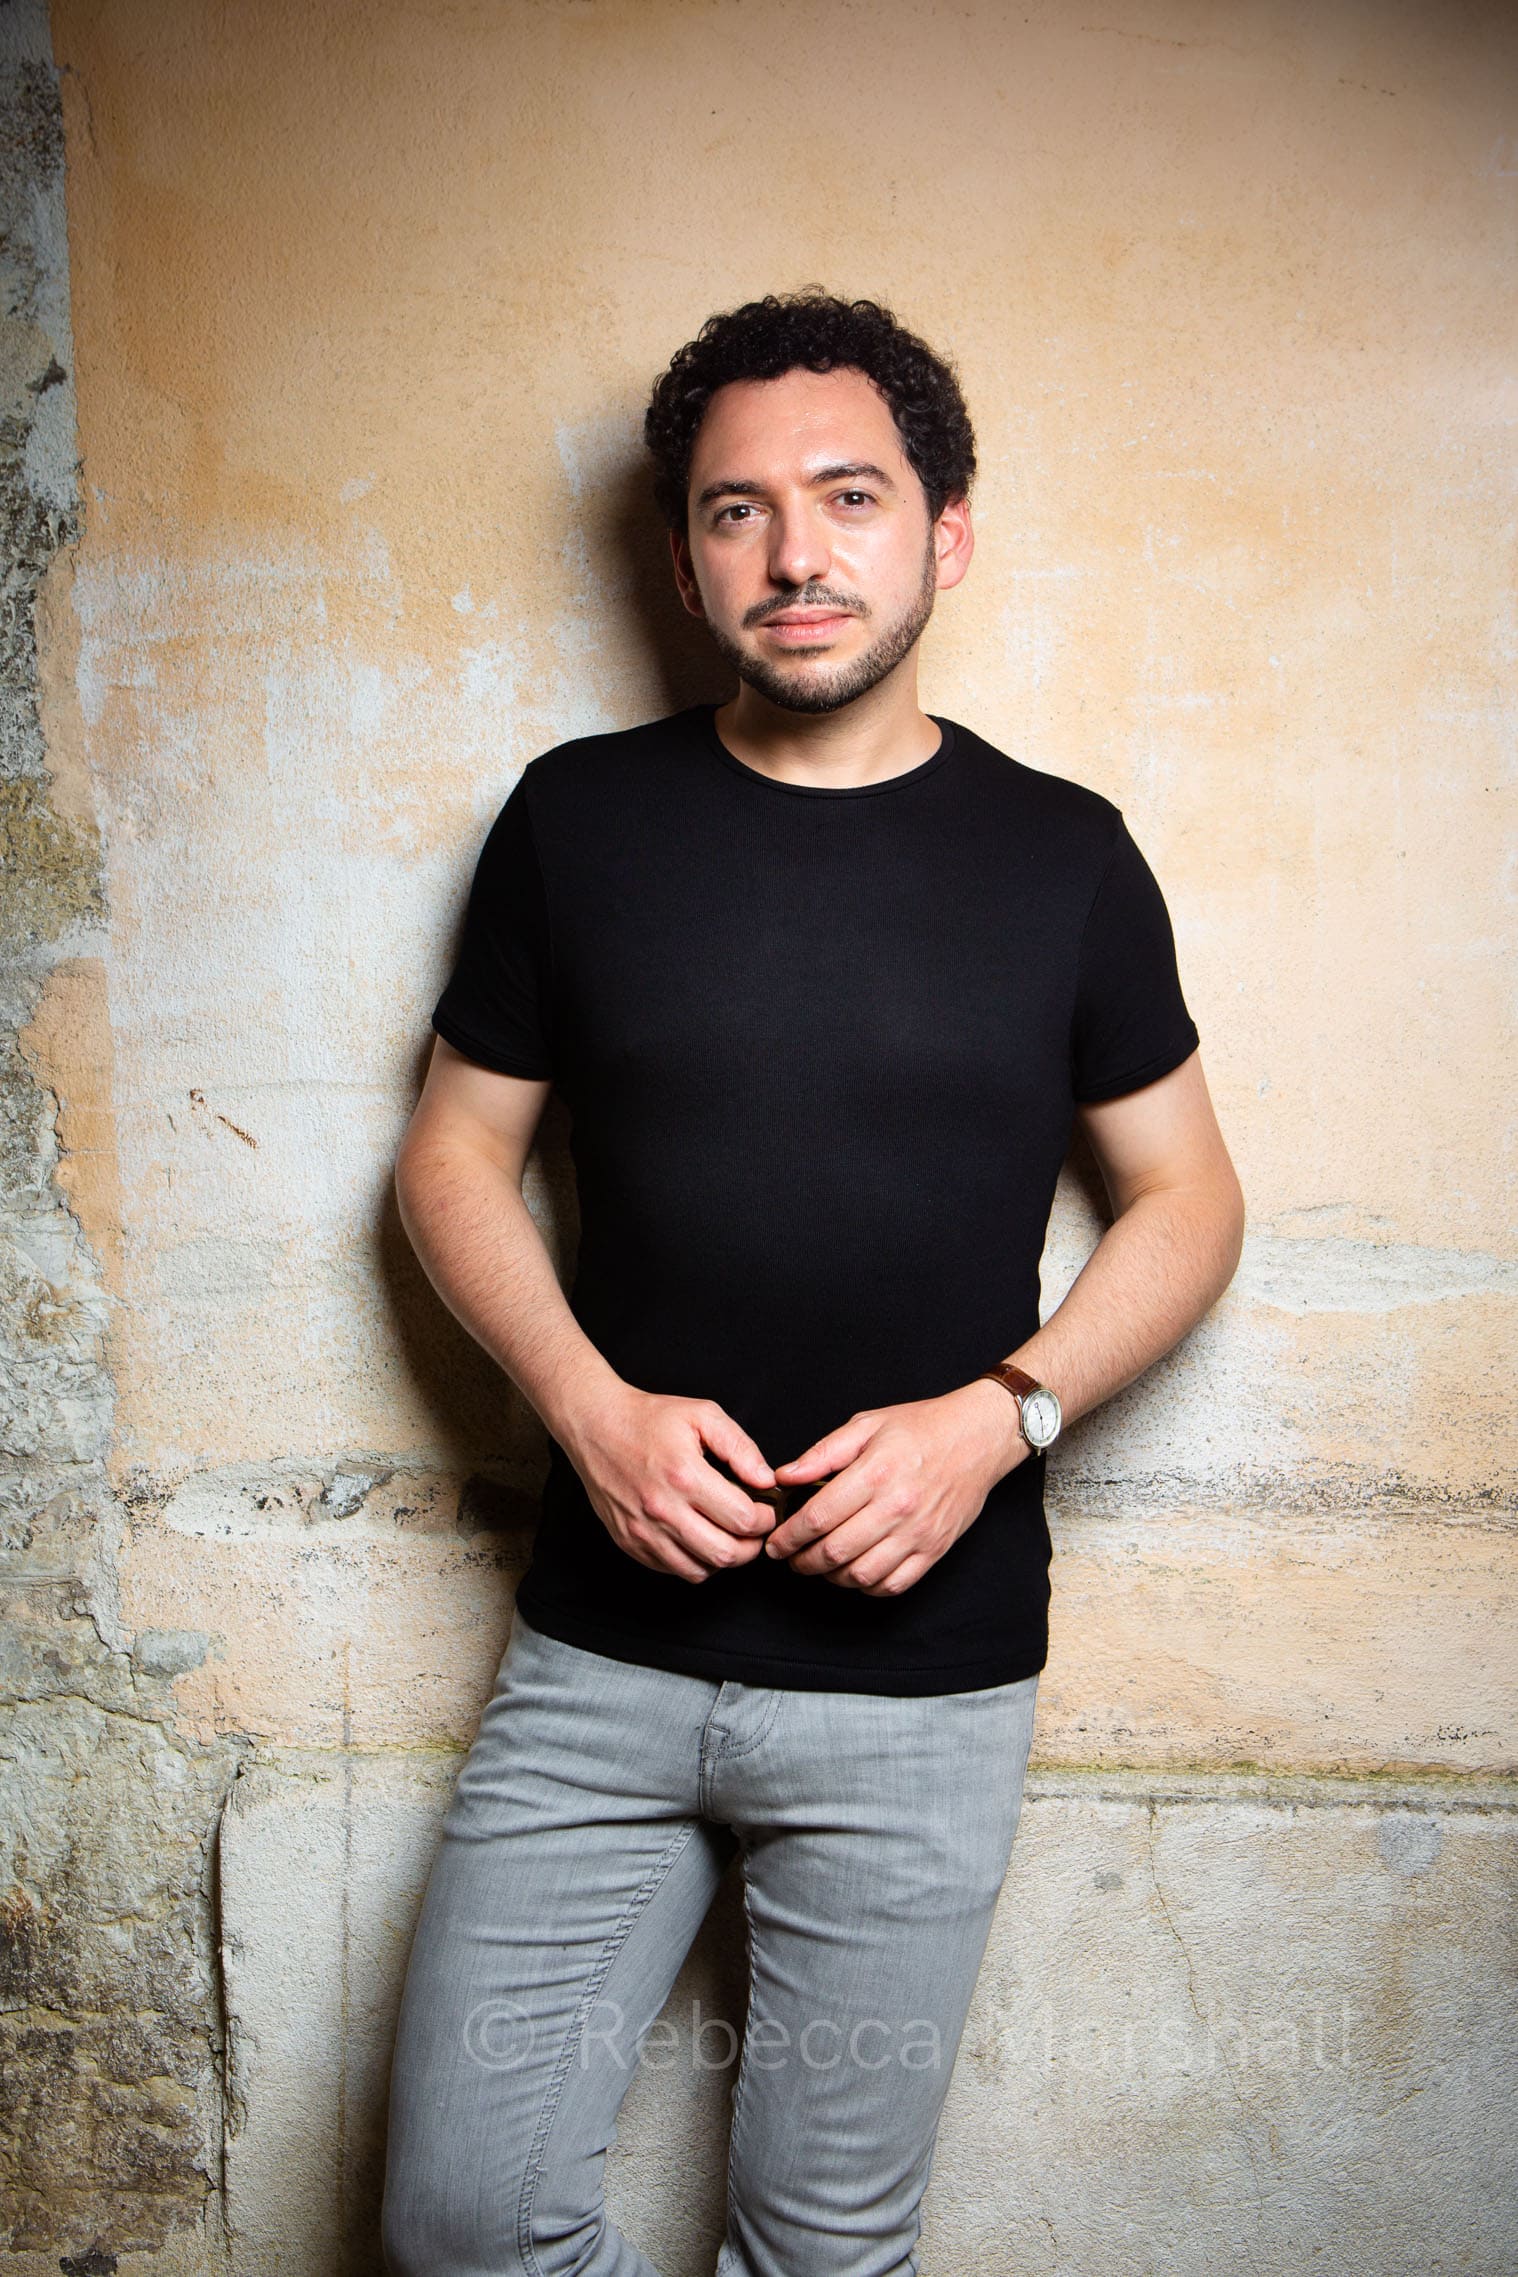 Dark-haired man in black T-shirt stands against a yellow wall facing the camera